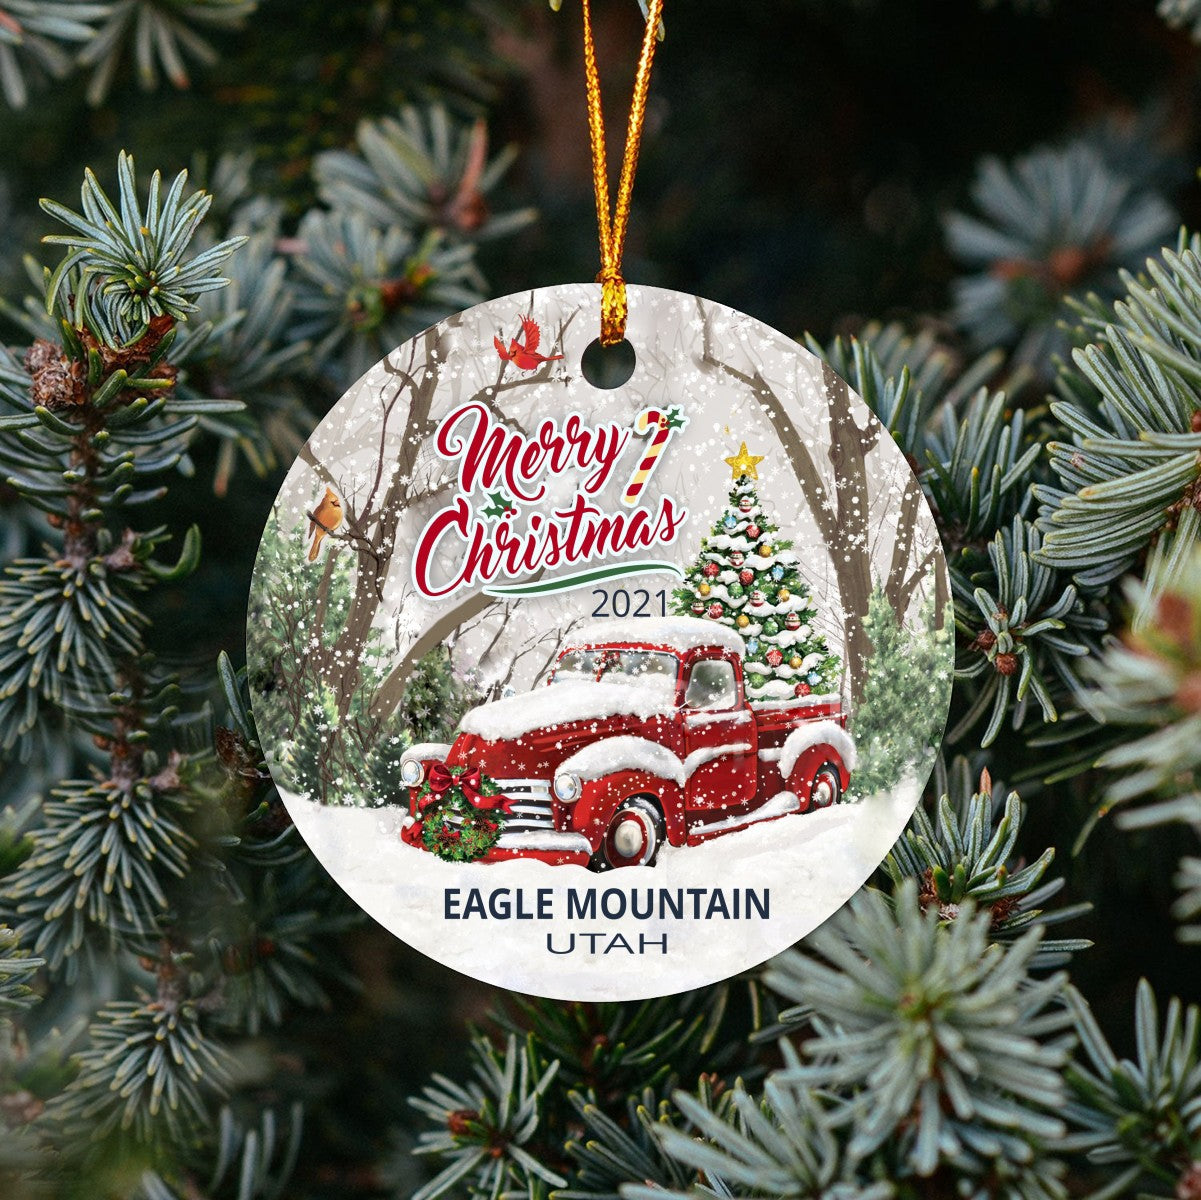 Christmas Tree Ornaments Eagle Mountain - Ornament With Name City, State Eagle Mountain Utah UT Ornament - Red Truck Xmas Ornaments 3'' Plastic Gift For Family, Friend And Housewarming